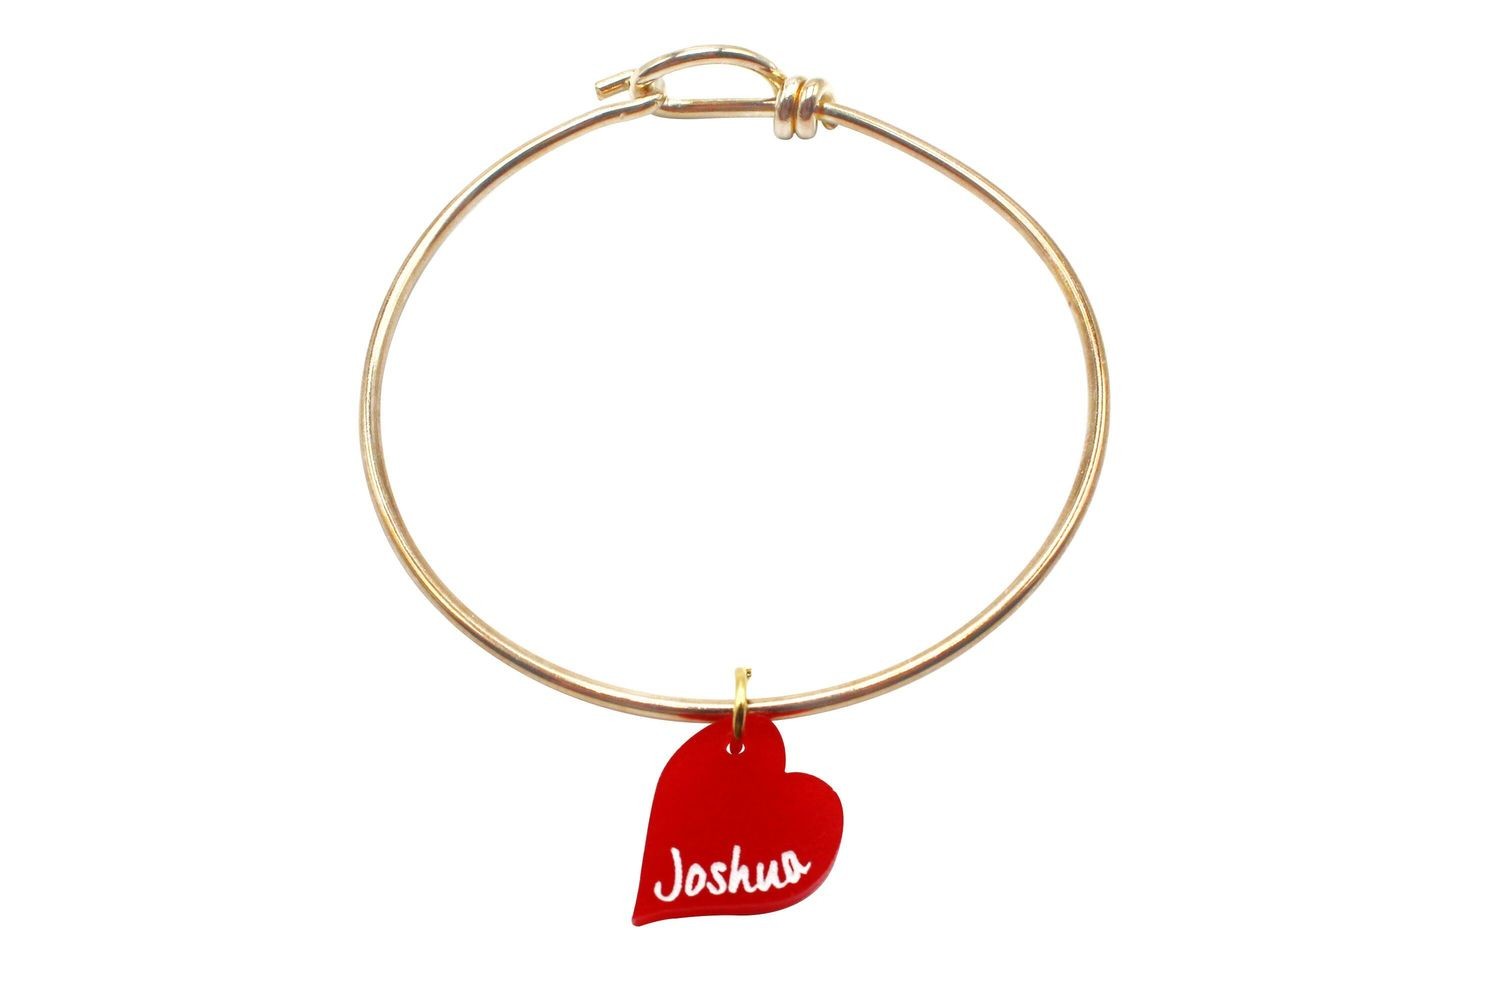 Personalized Heart Shaped Charm with Name on Decorative Wire Bracelet